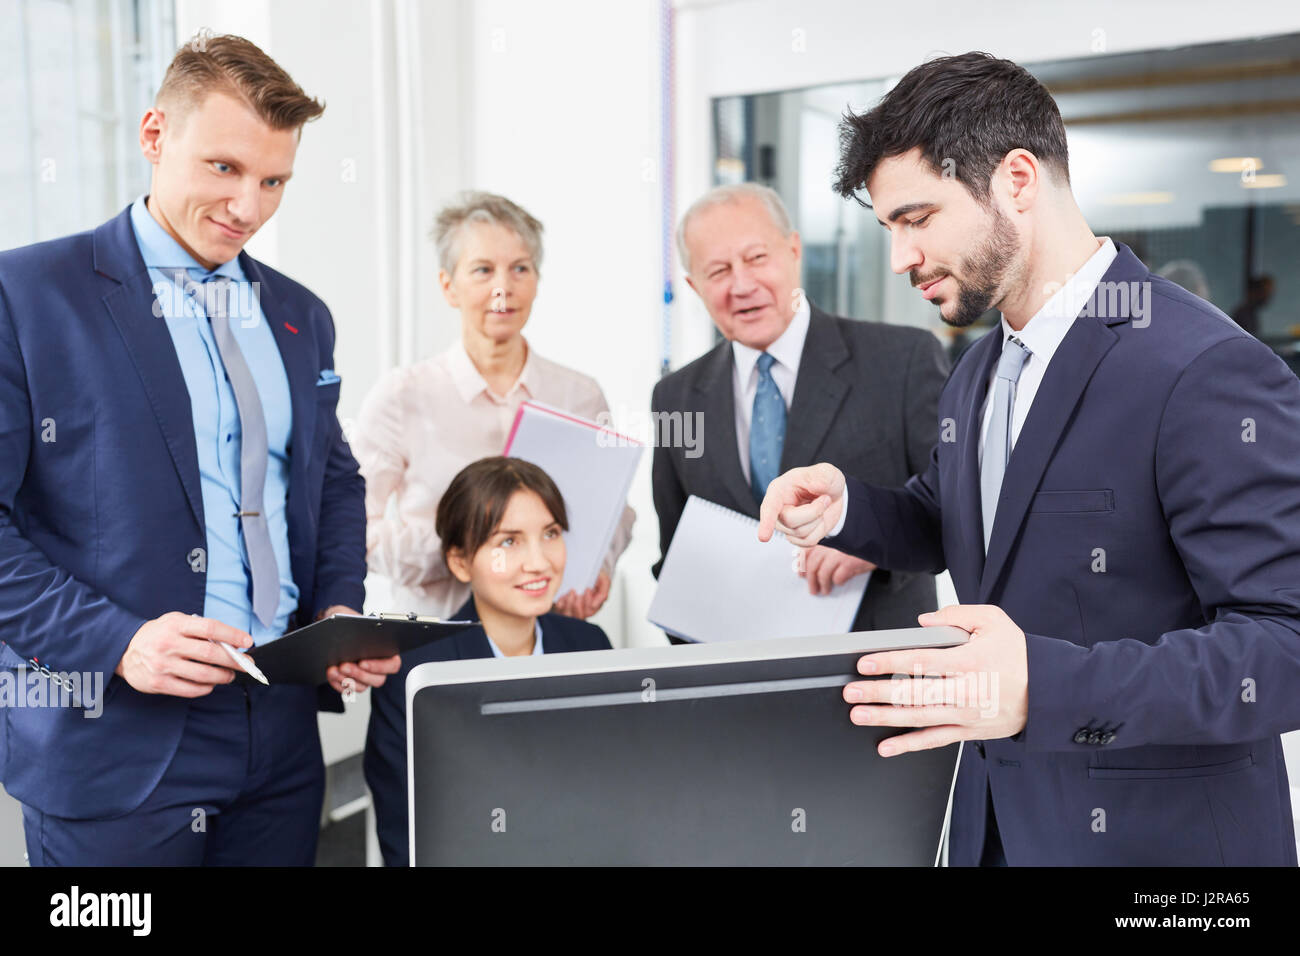 Business team in computer seminar with expert training coach Stock Photo